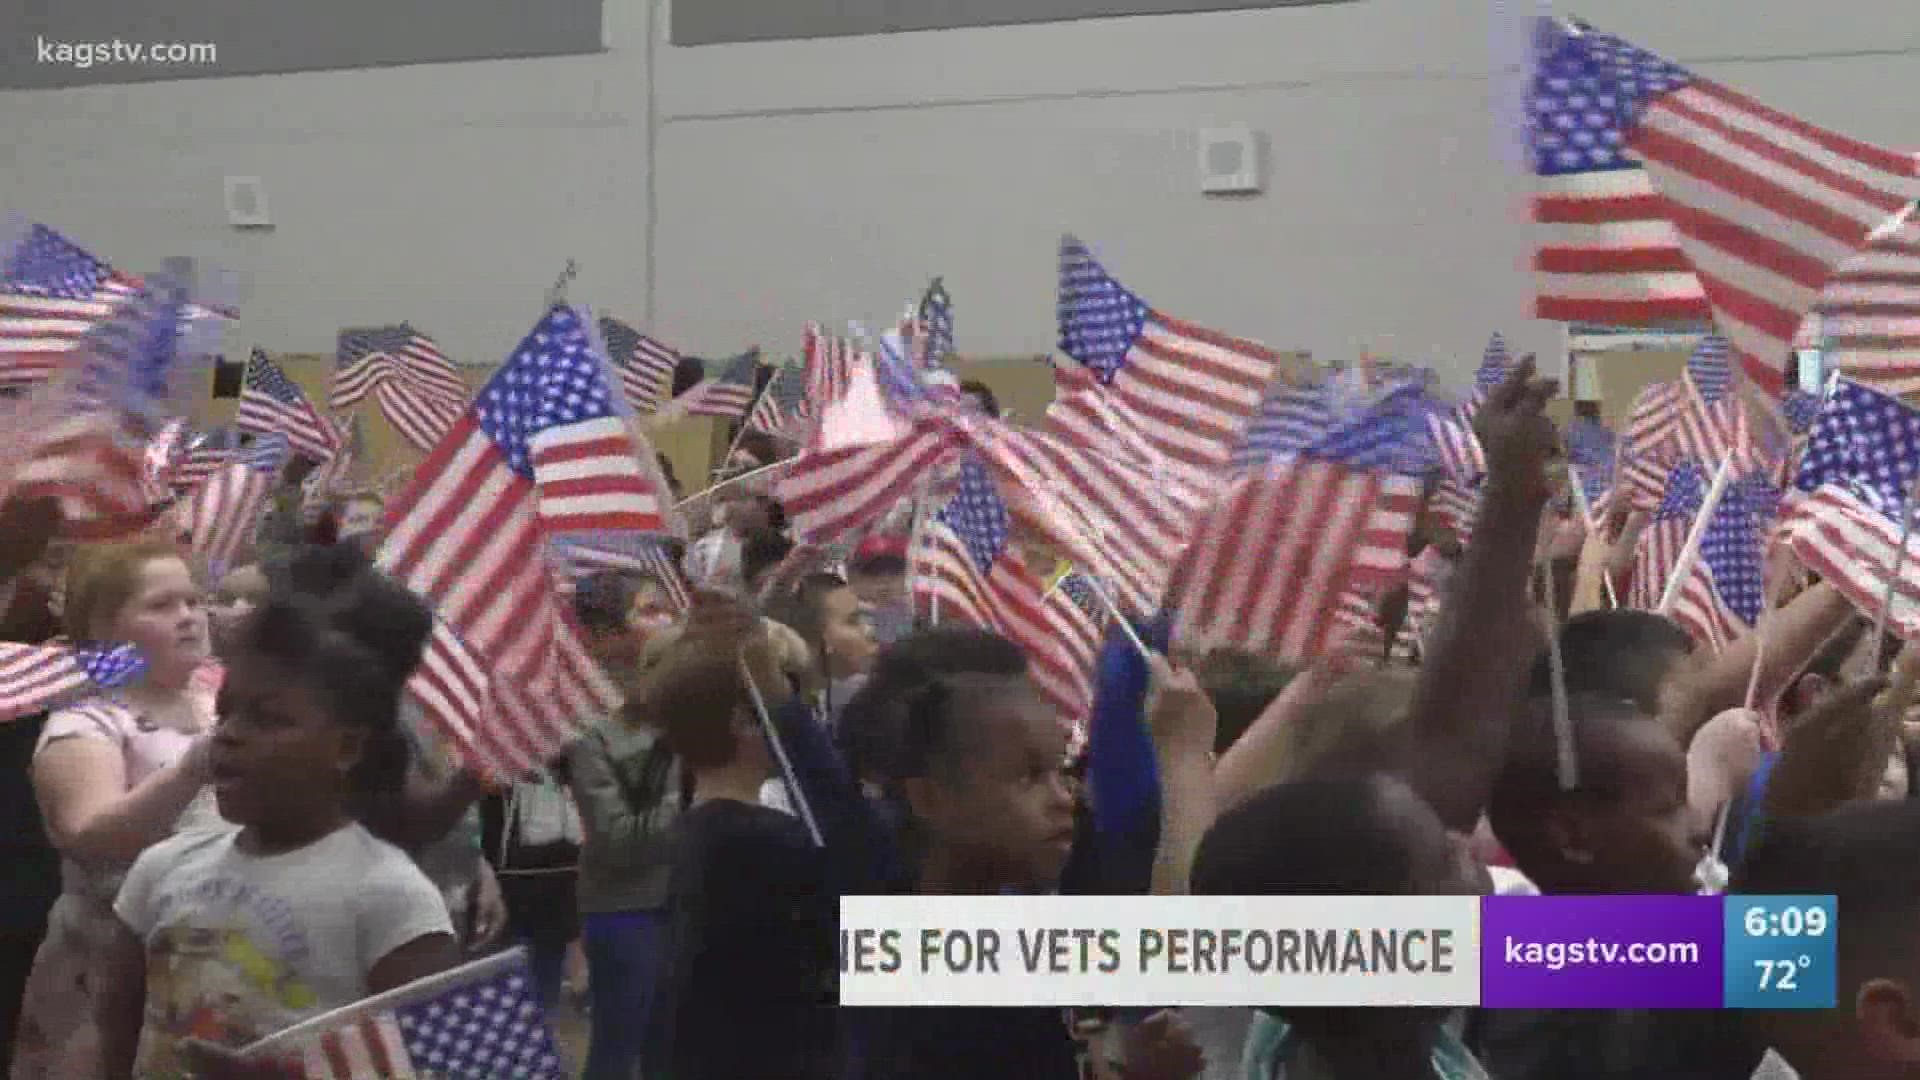 Students from Bryan ISD honored veterans and those on the front lines with a concert and thanking them for their service.